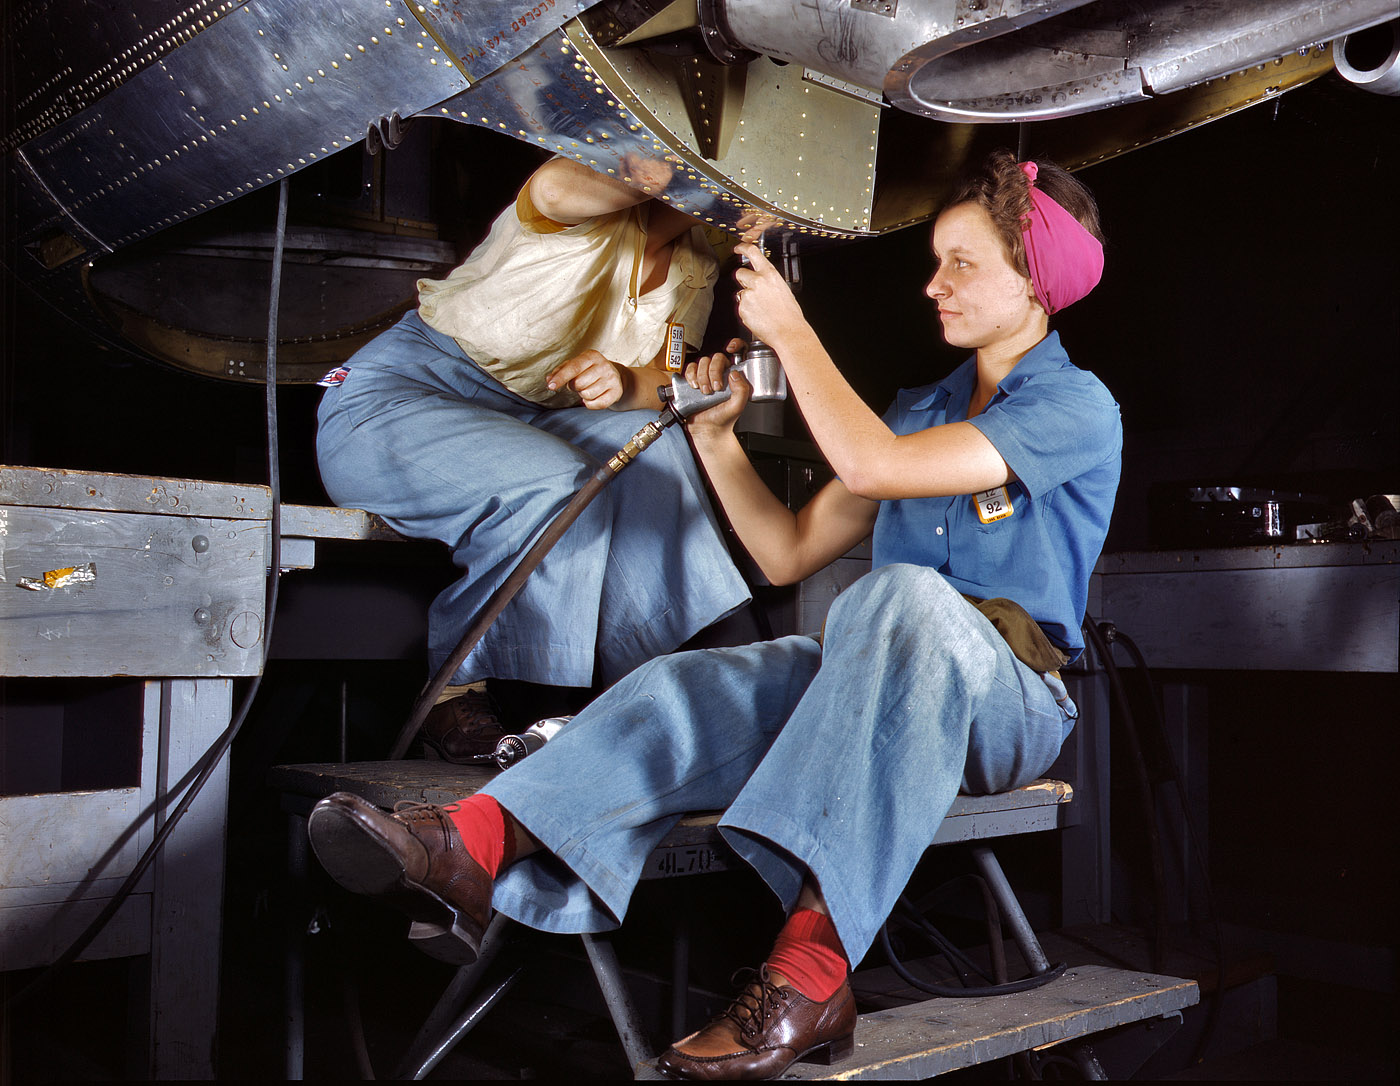 October 1942. Yet another still from the Technicolor pajama party that was the American aircraft industry in World War II: "Women at work on bomber, Douglas Aircraft Company, Long Beach, California." View full size. 4x5 Kodachrome transparency by Alfred Palmer for the Office of War Information.